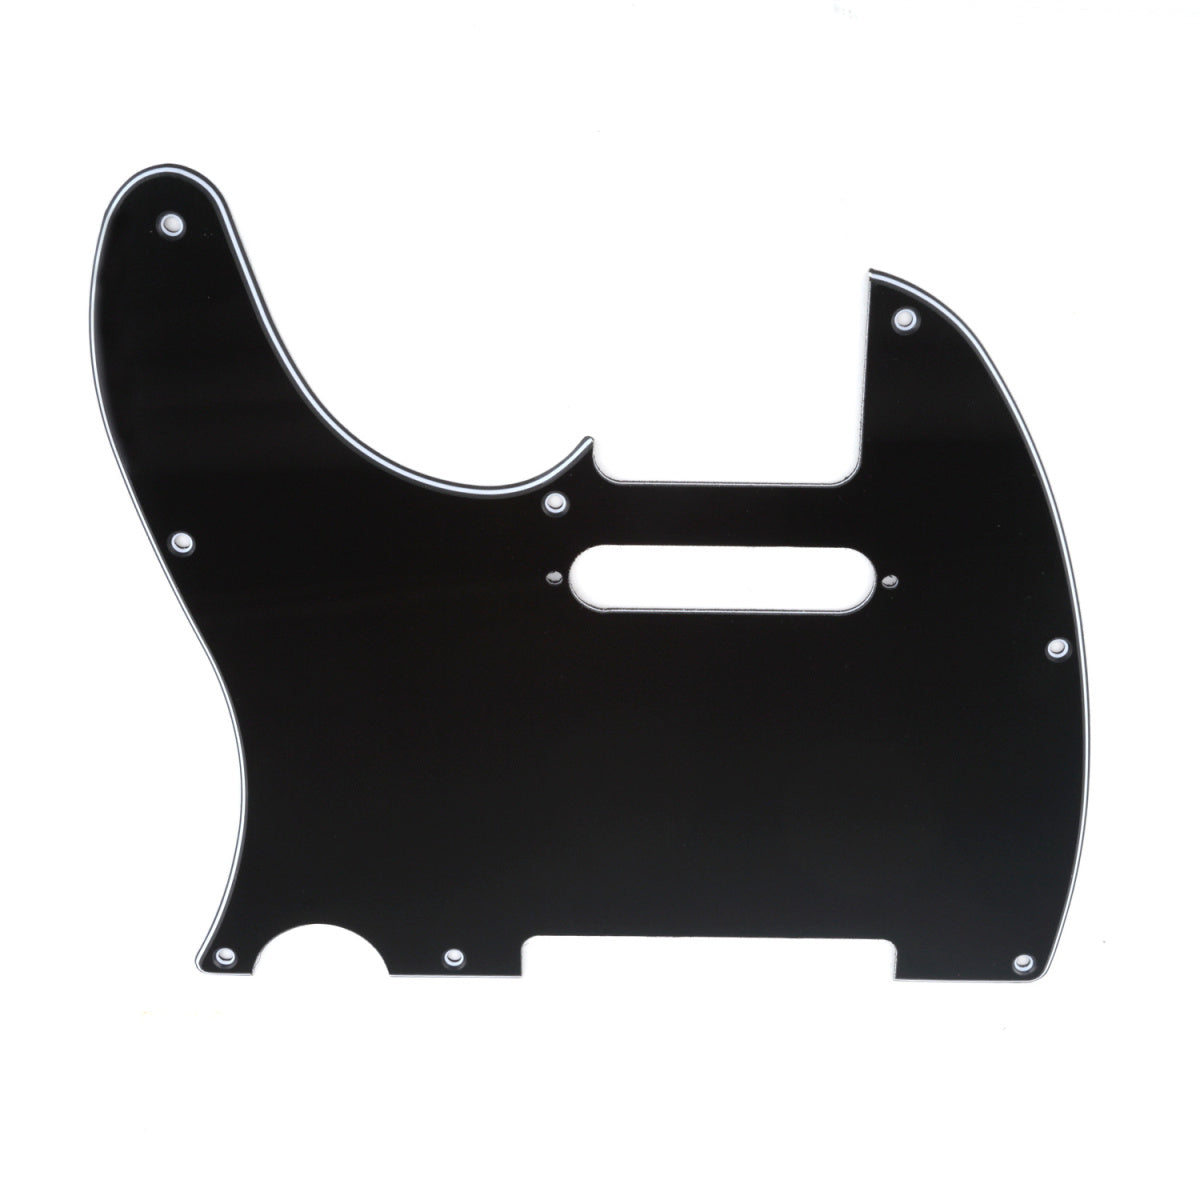 Musiclily Left Handed 8 Hole Guitar Tele Pickguard for American/Mexican Made Fender Telecaster Standard Modern Style, 3Ply Black